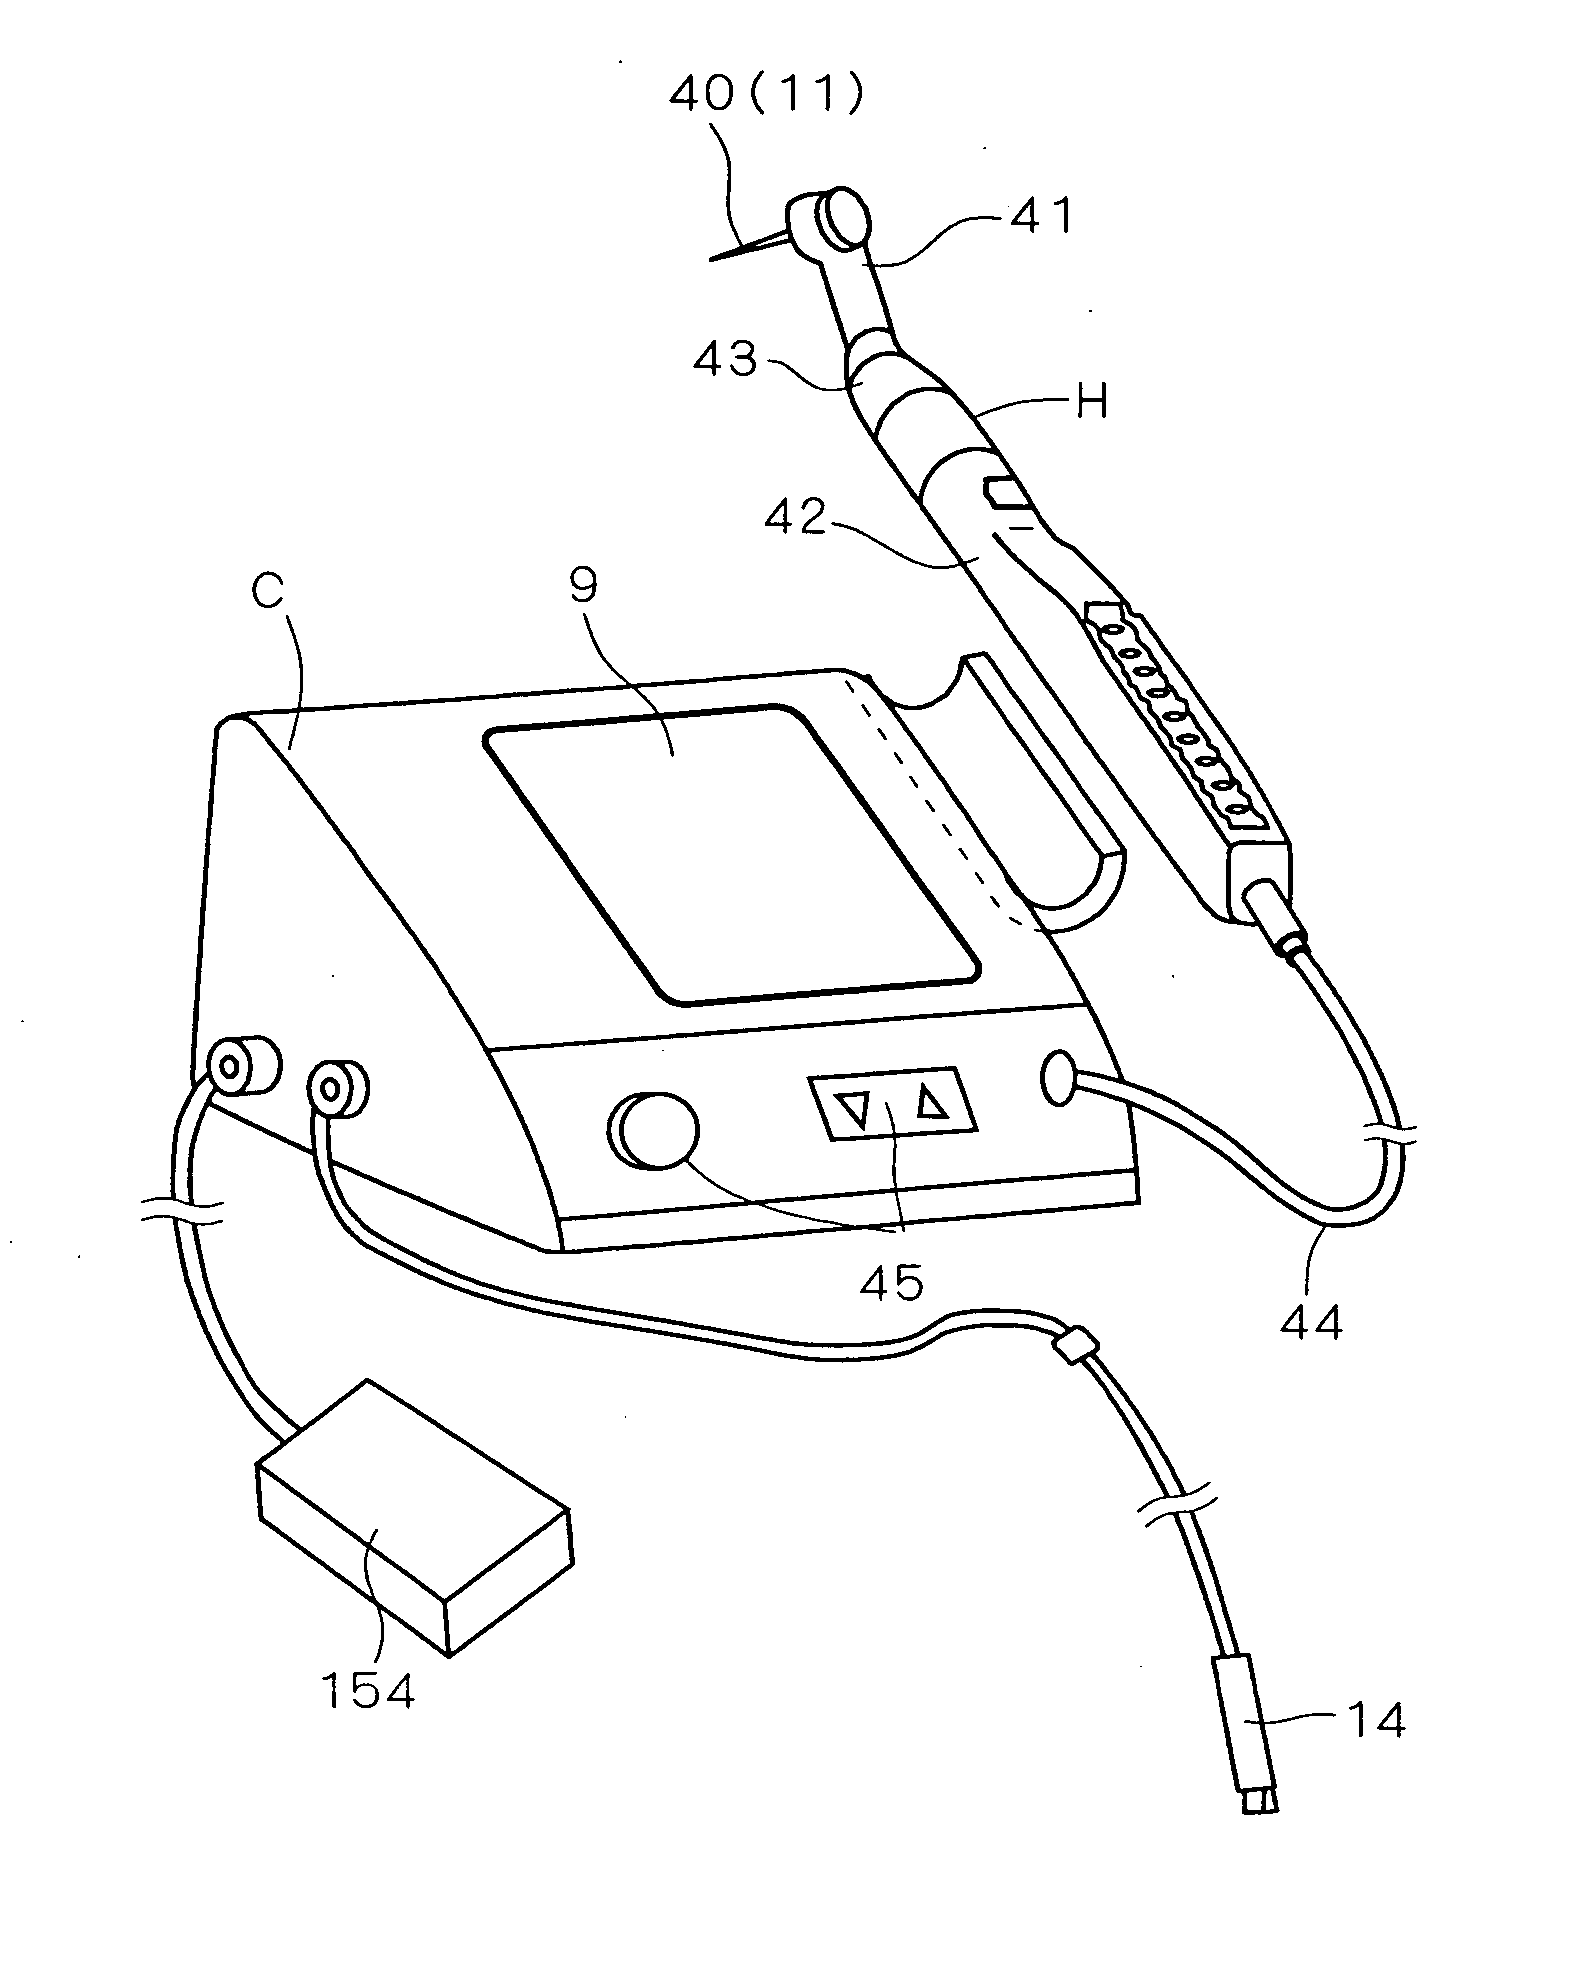 Root canal length measuring apparatus and root canal therapy apparatus